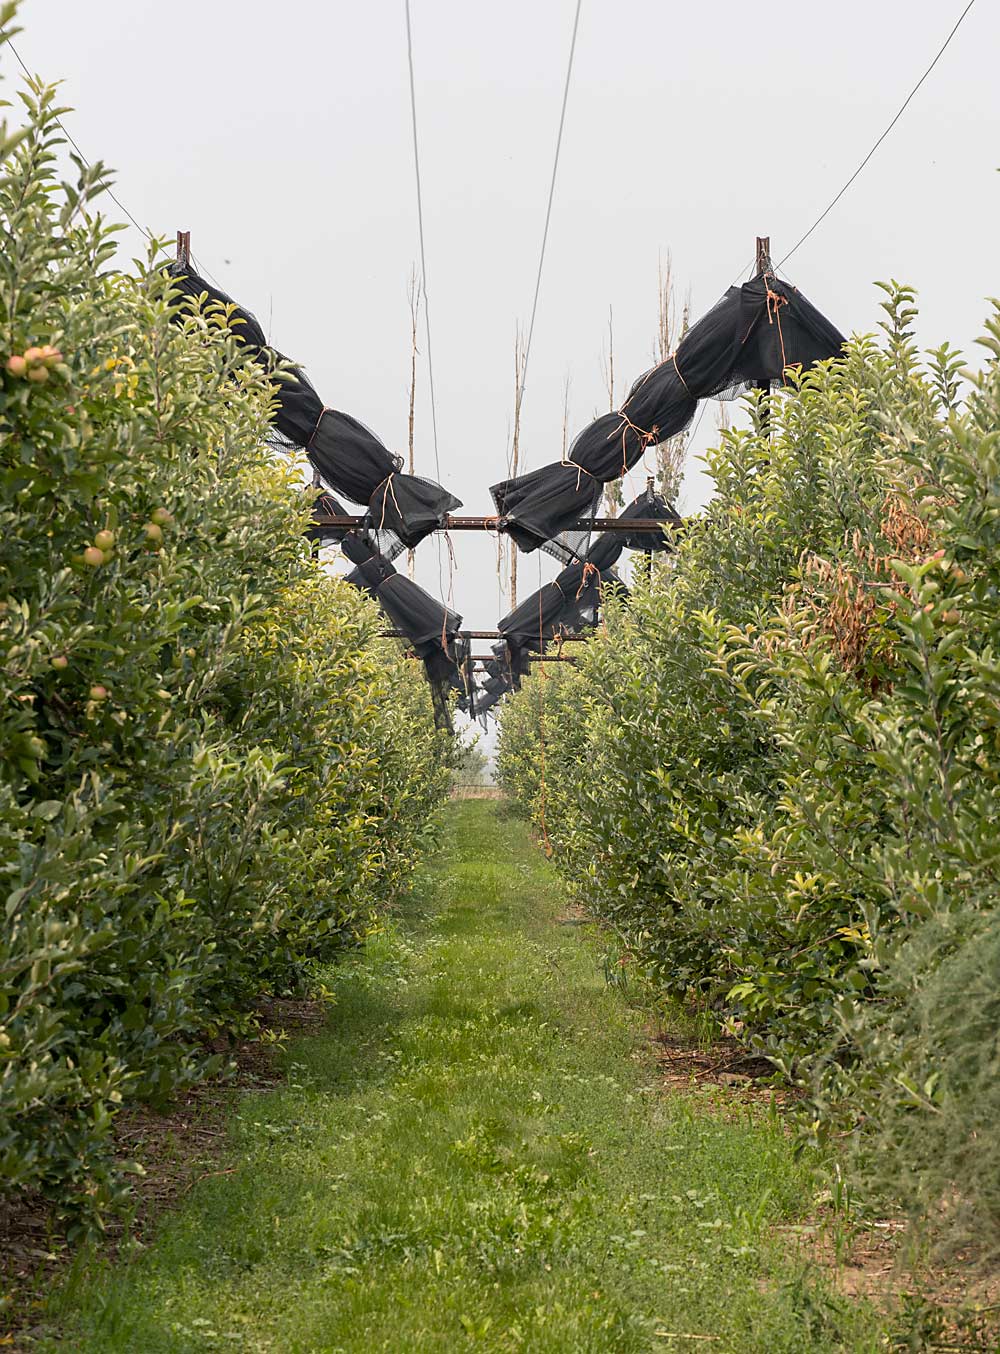 The top challenges for growing fruit in Cedaredge are frost and hail, Williams said. His father, Dan, introduced hail netting years ago, and the company now uses it on all their producing apple blocks, including these Galas that had a very short crop in 2021 after freeze damage in 2020. (Kate Prengaman/Good Fruit Grower)